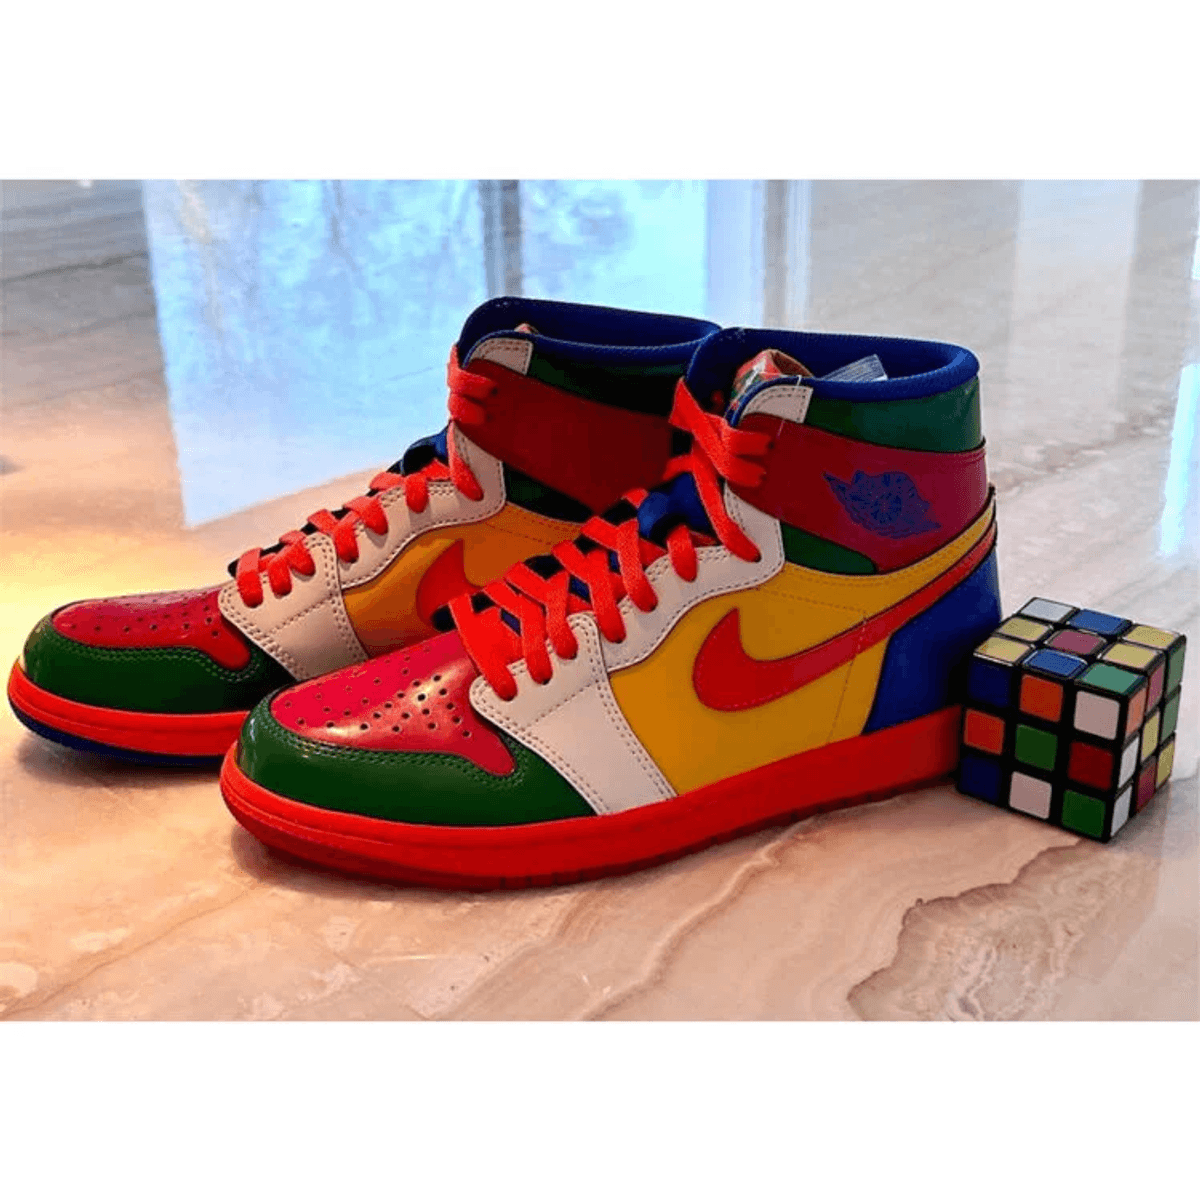 The Air Jordan 1 Rubik's Cube Sample Will Have You Just As Confused